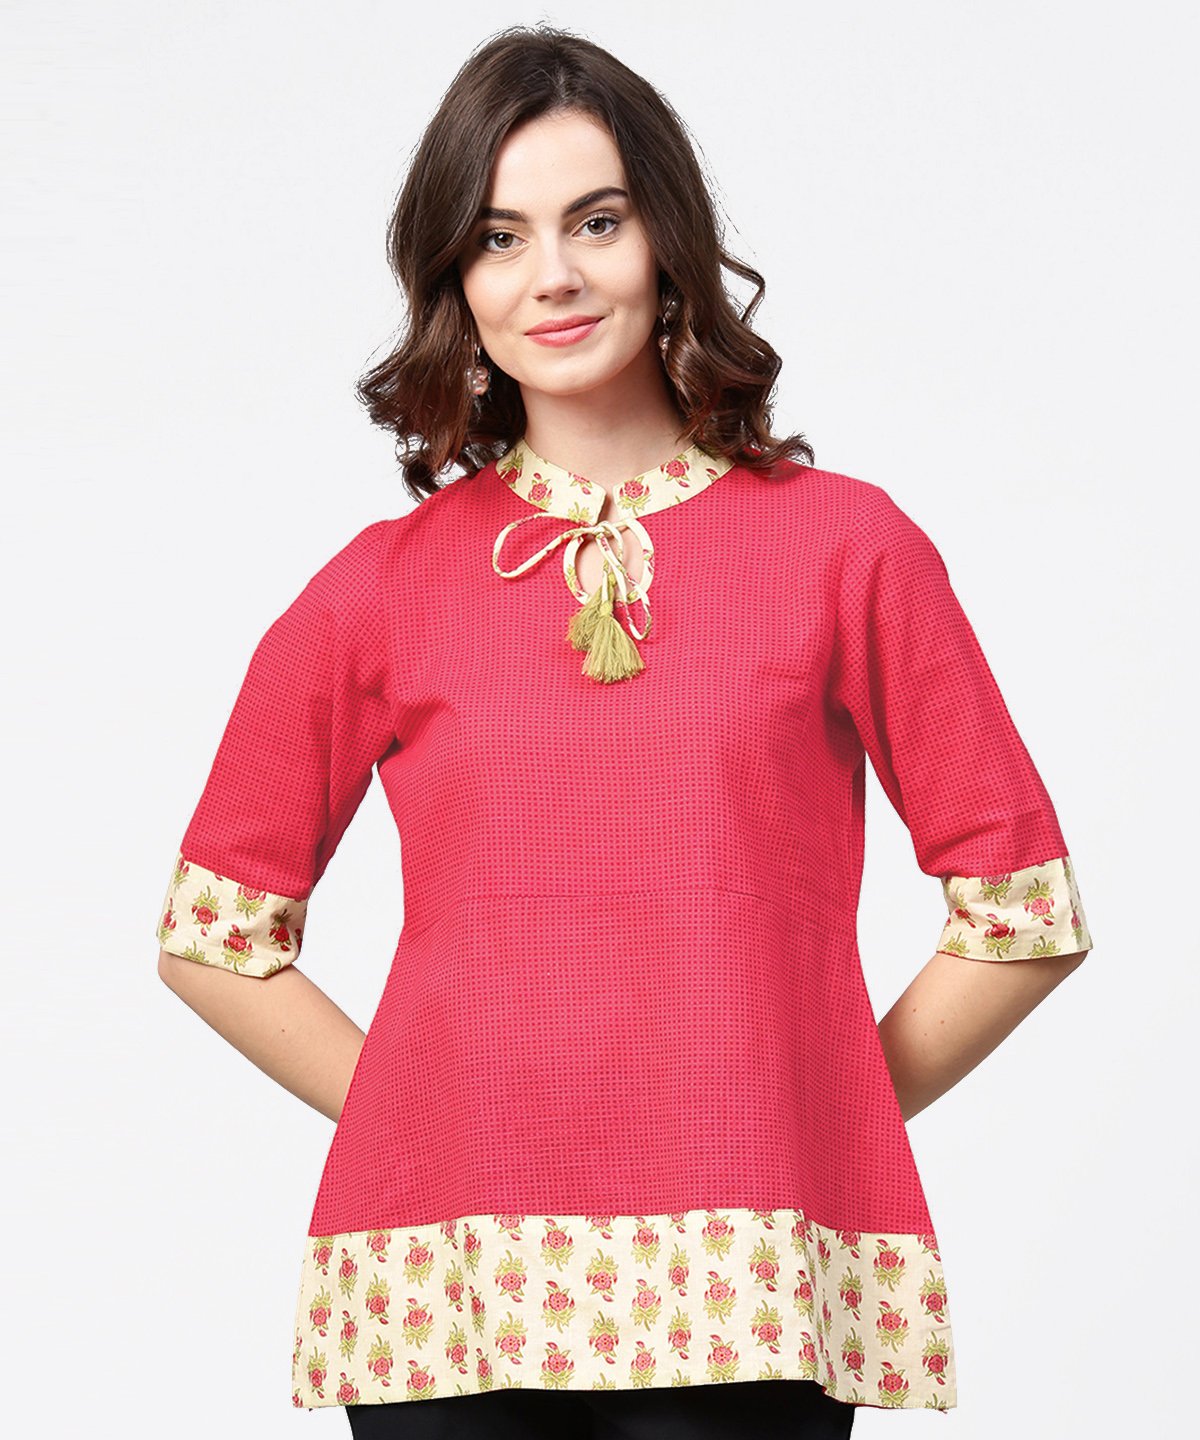 Women's Pink Half Sleeve Key Hole Neck Cotton Tops With Printed Border - Nayo Clothing